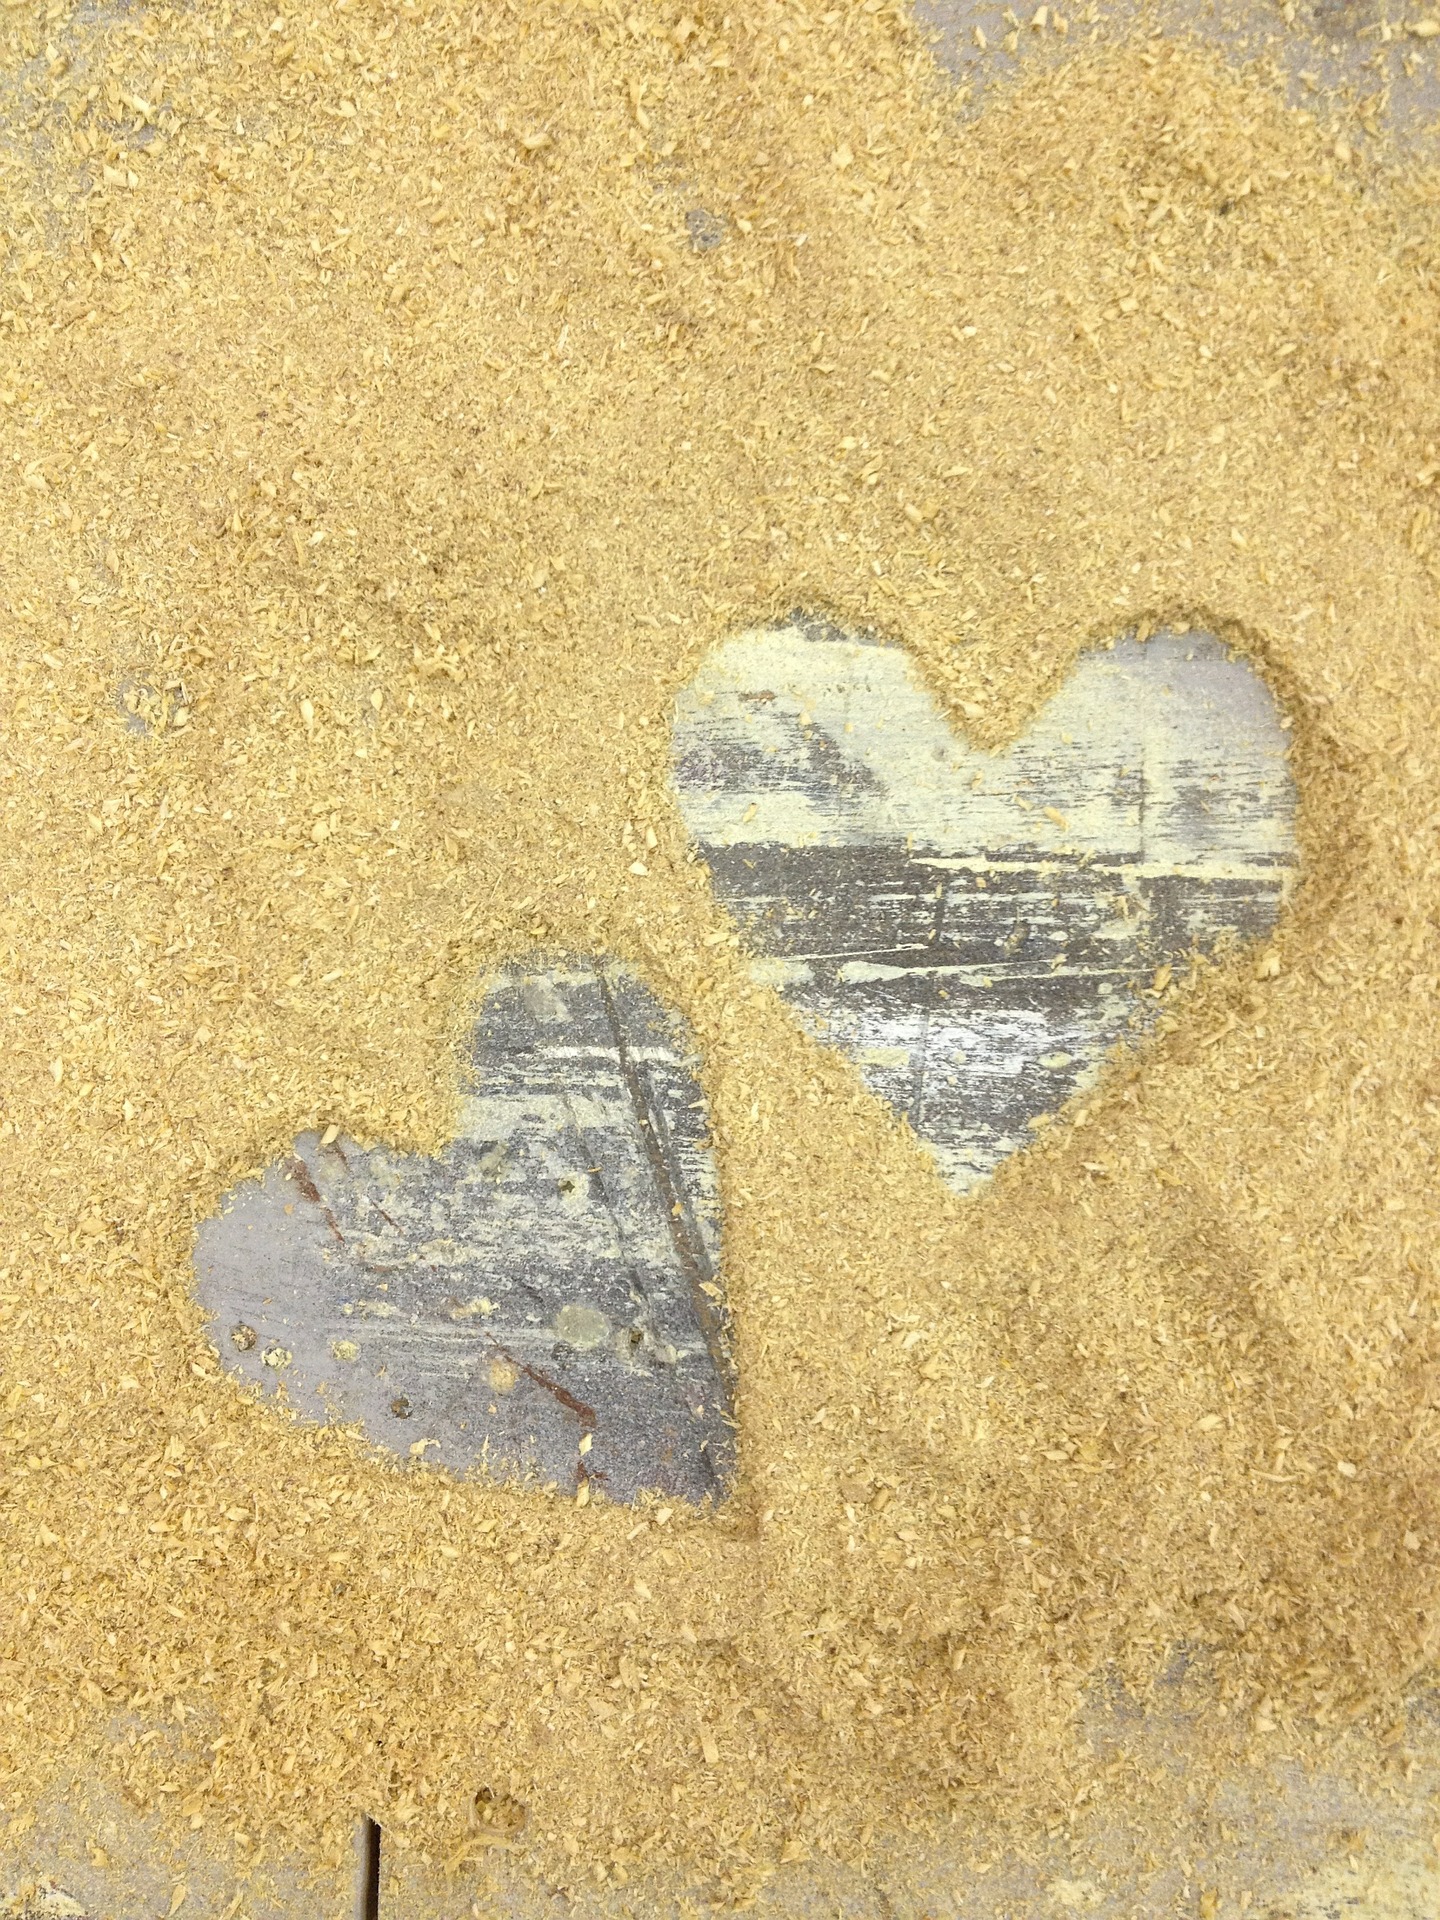 a picture of hearts etched with sawdust on a plank of wood